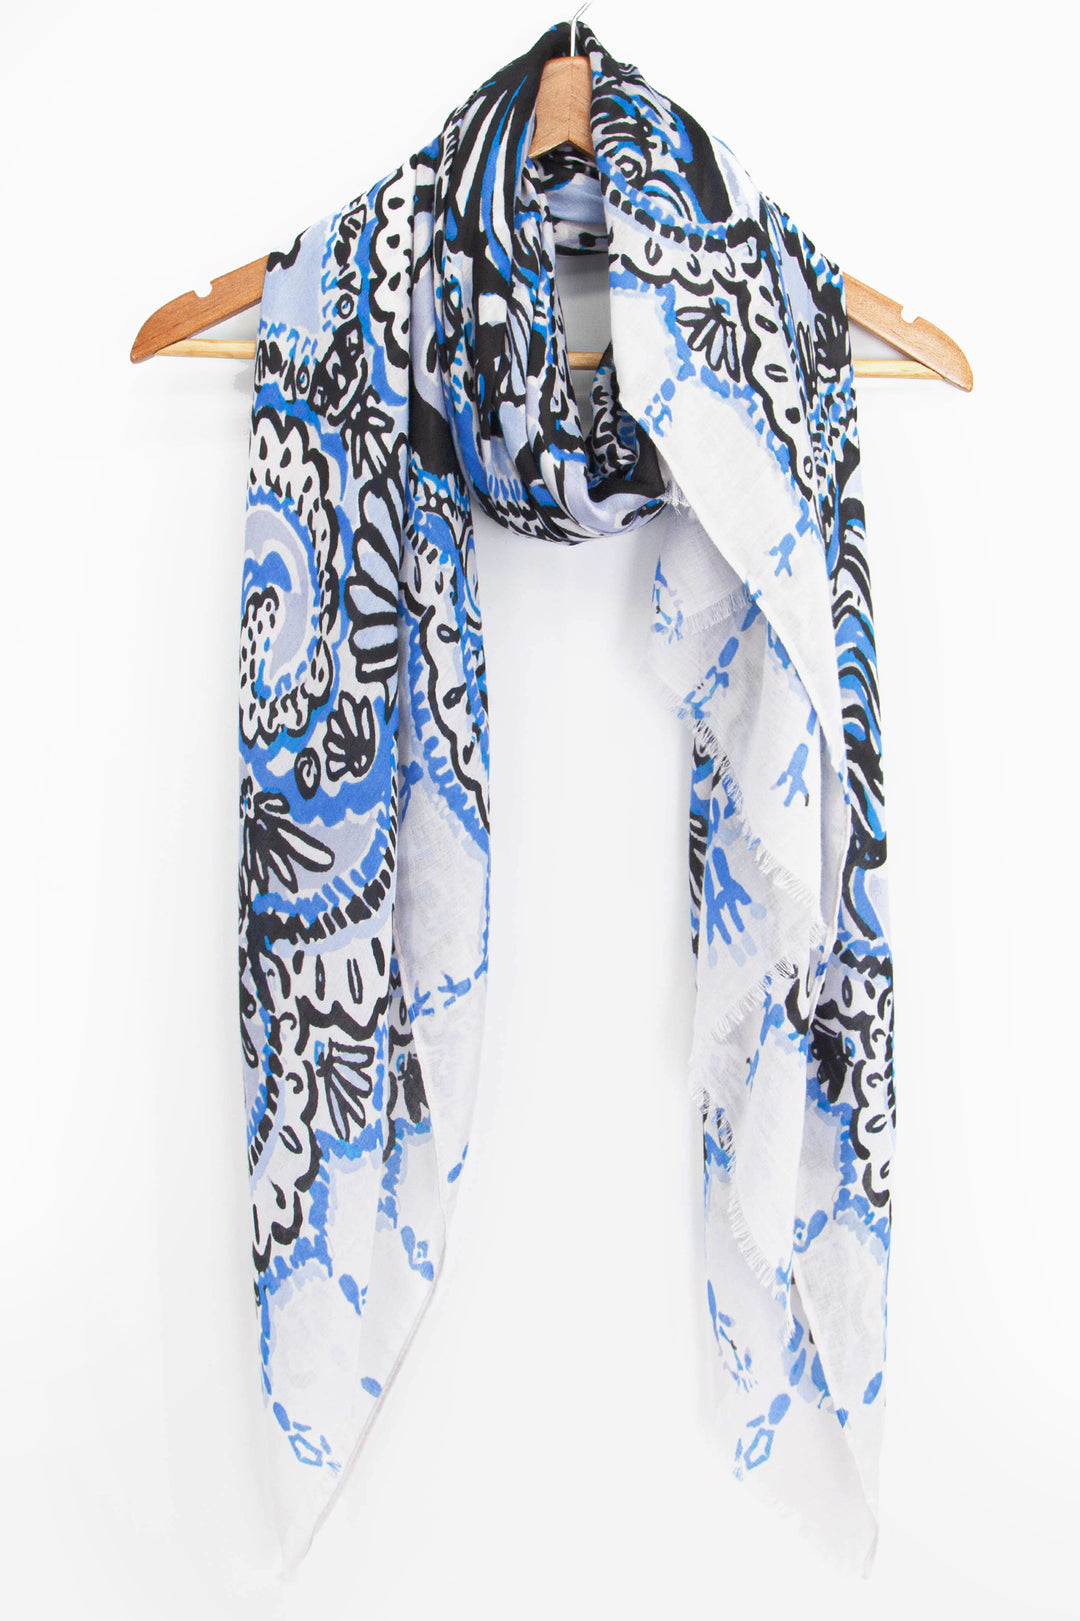 black and blue lightweight summer scarf featuring an ornate pattern of seashells and fish